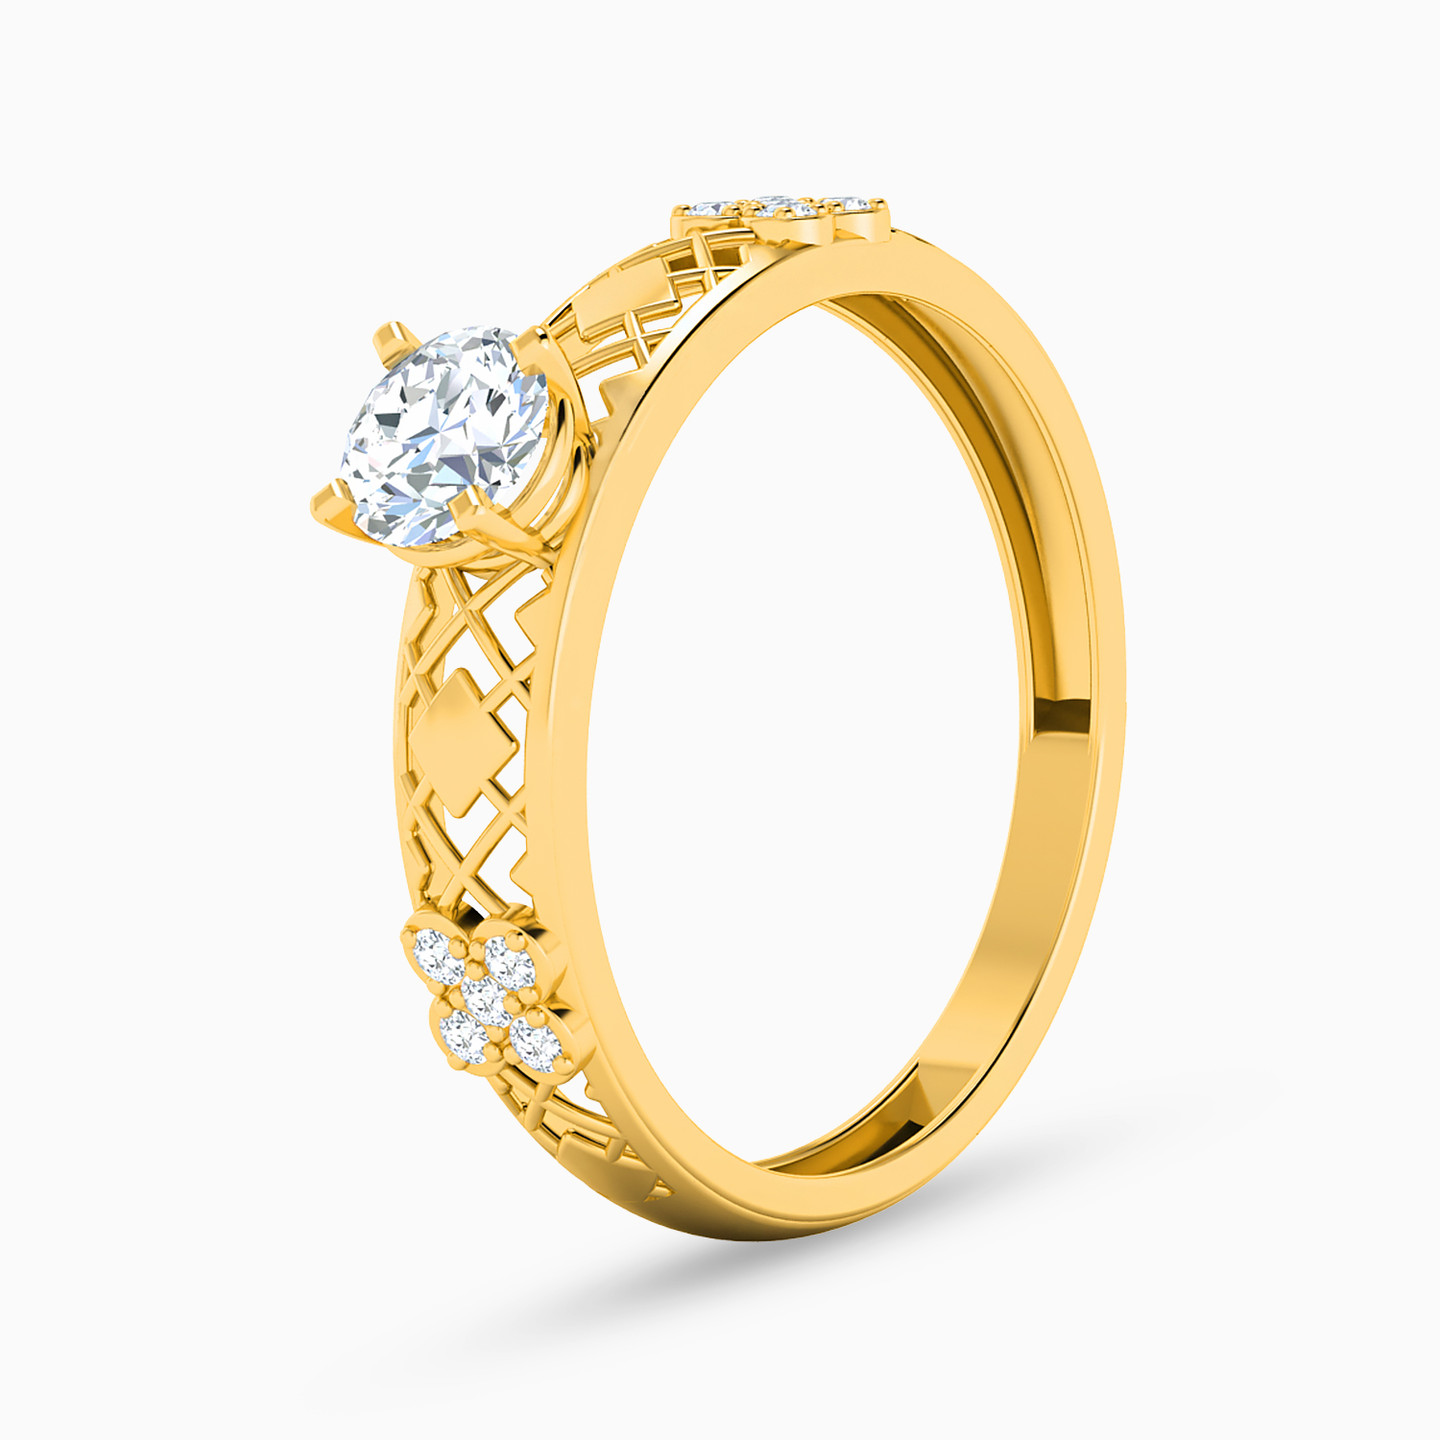 21K Gold Cubic Zirconia Twins Ring - 2